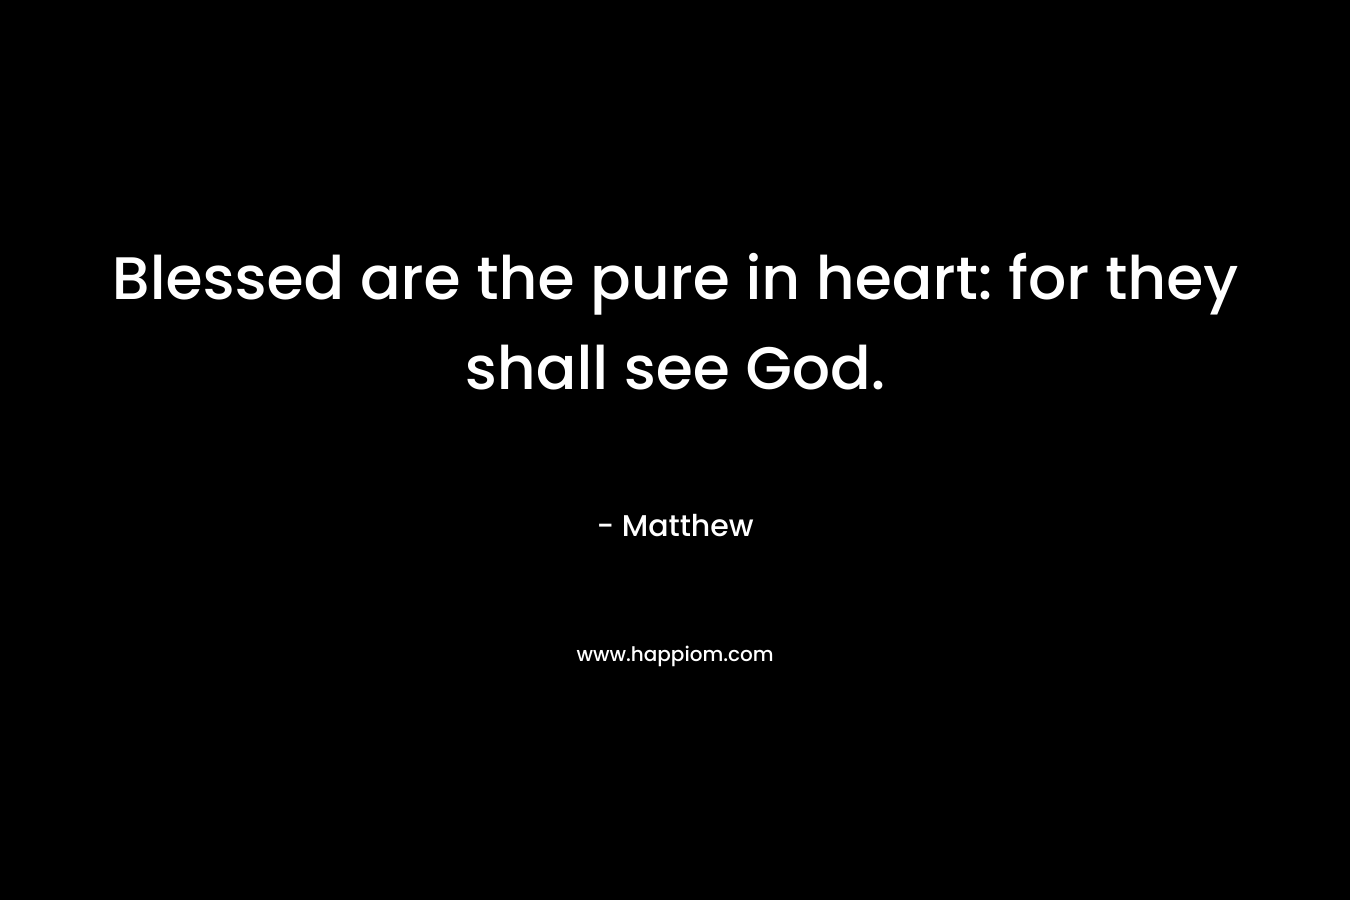 Blessed are the pure in heart: for they shall see God.